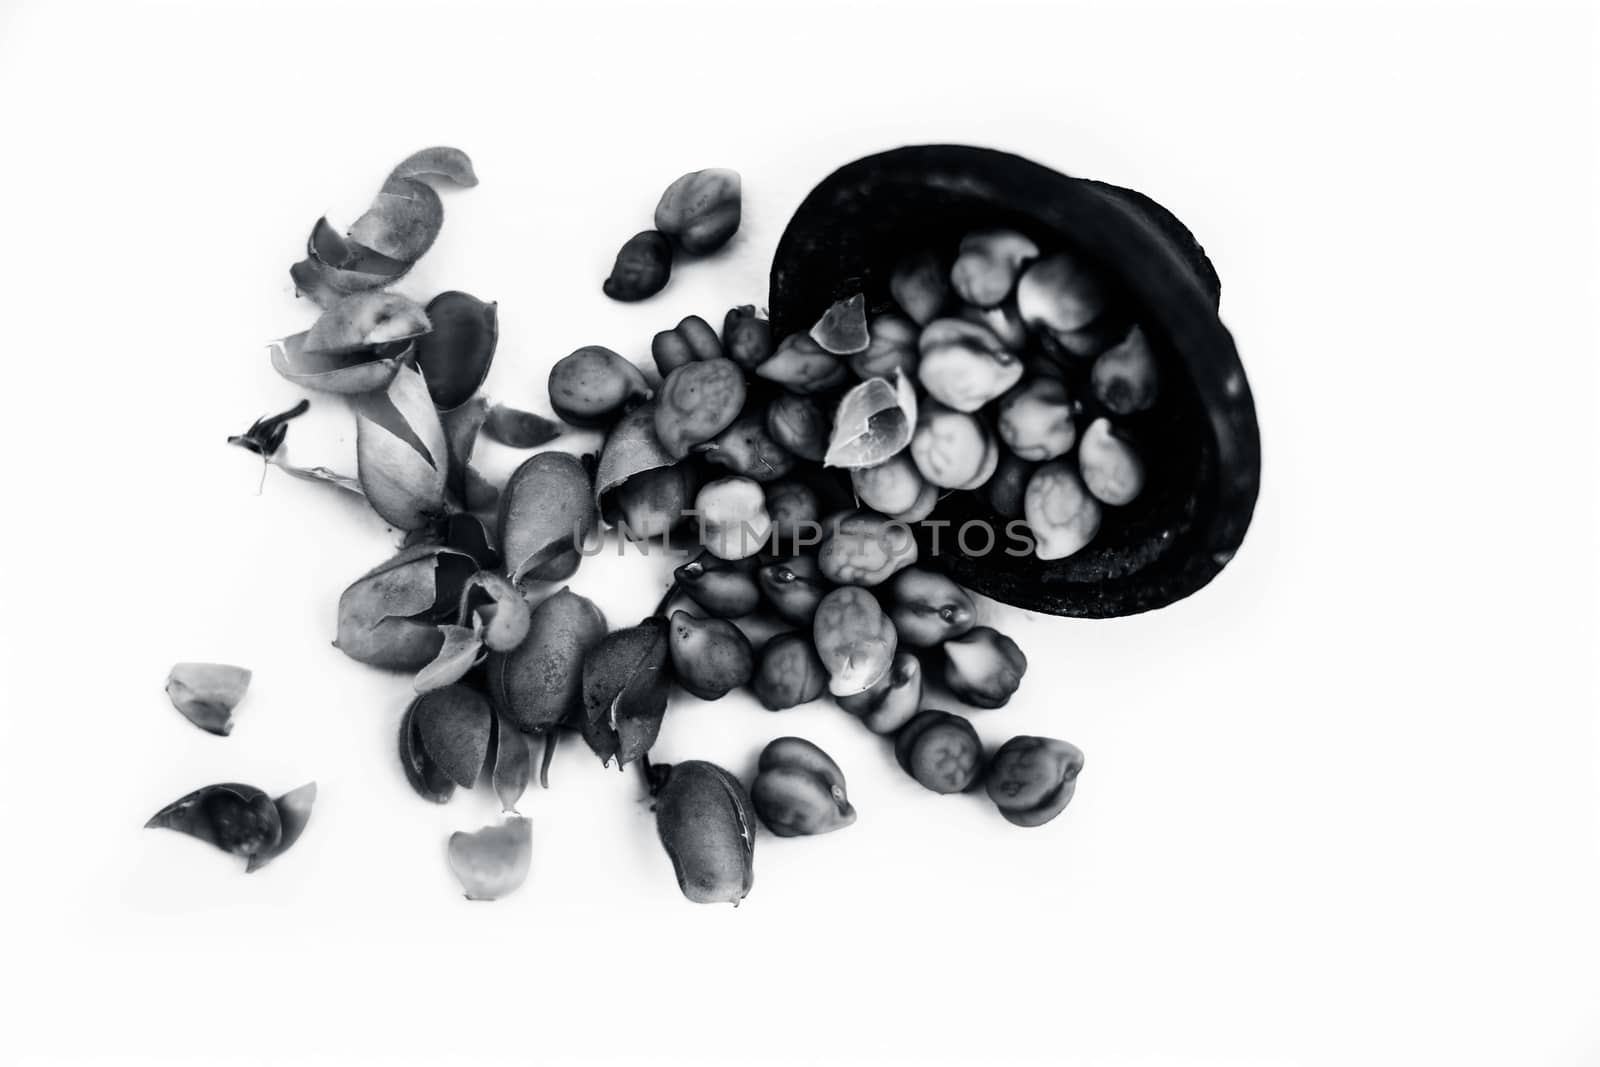 Ginjua or gingua or chick peas or chick pods or Egyptian beans in a clay bowl isolated on white.